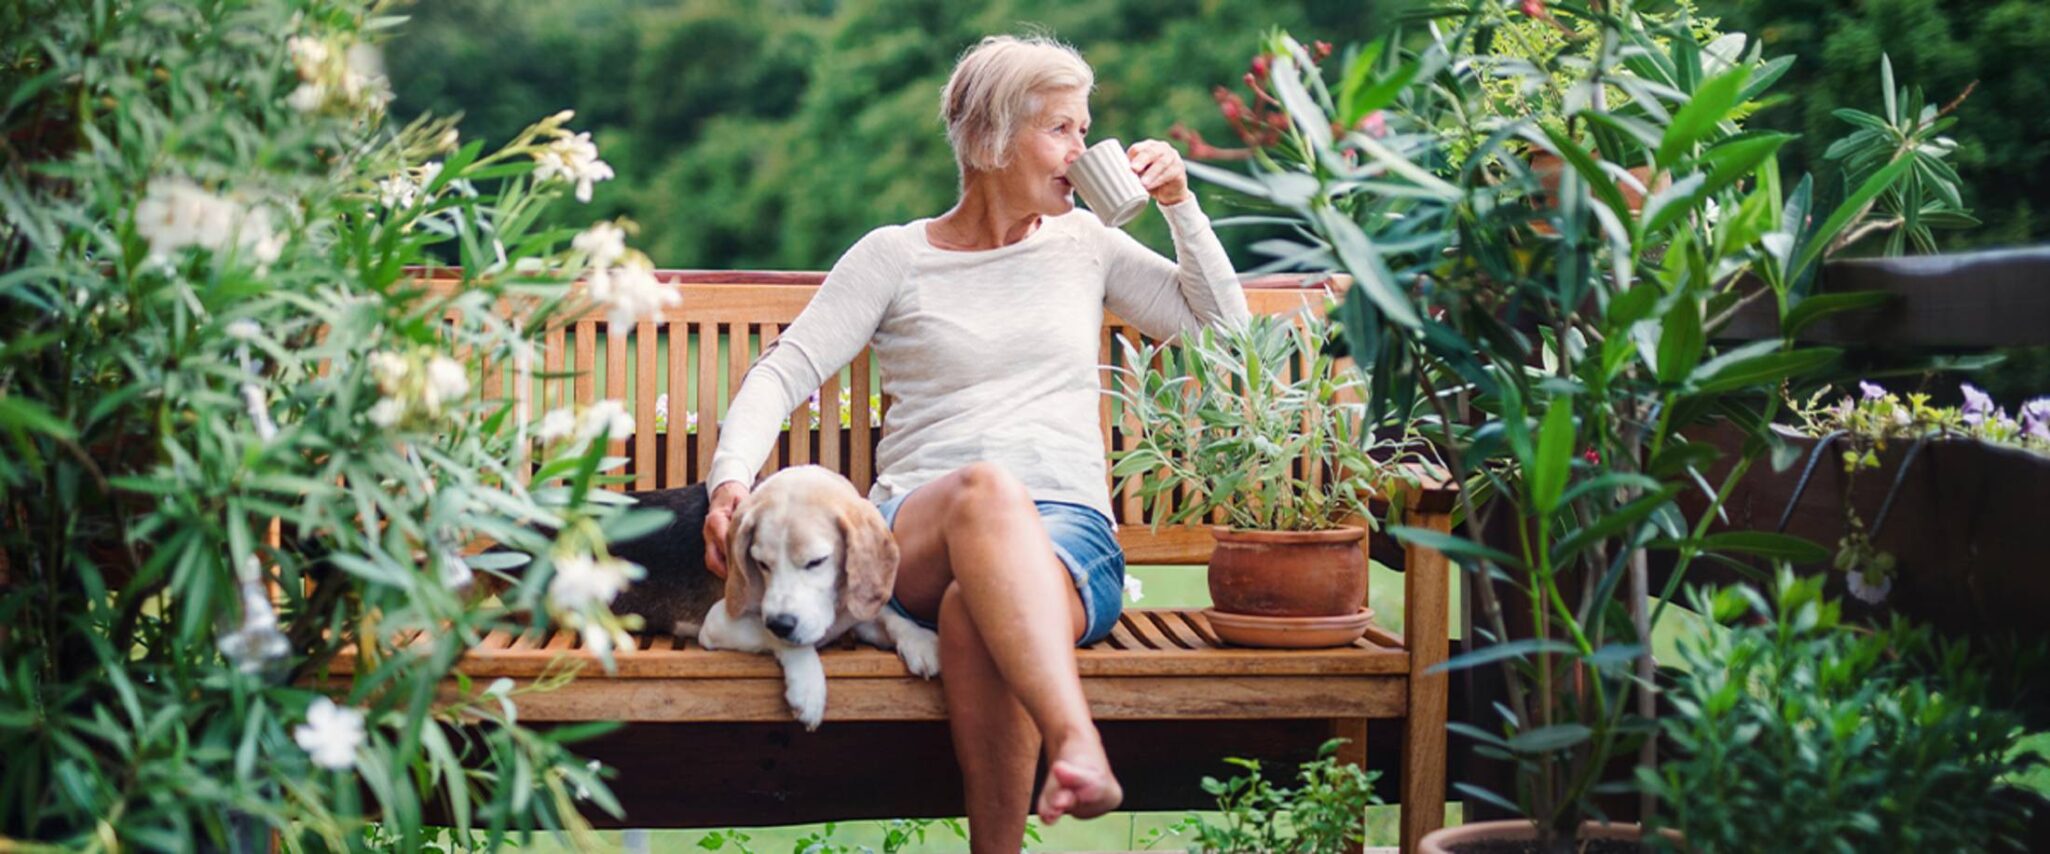 A senior woman sits outside with her dog, drinking coffee on a wood bench surrounded by lush greenery